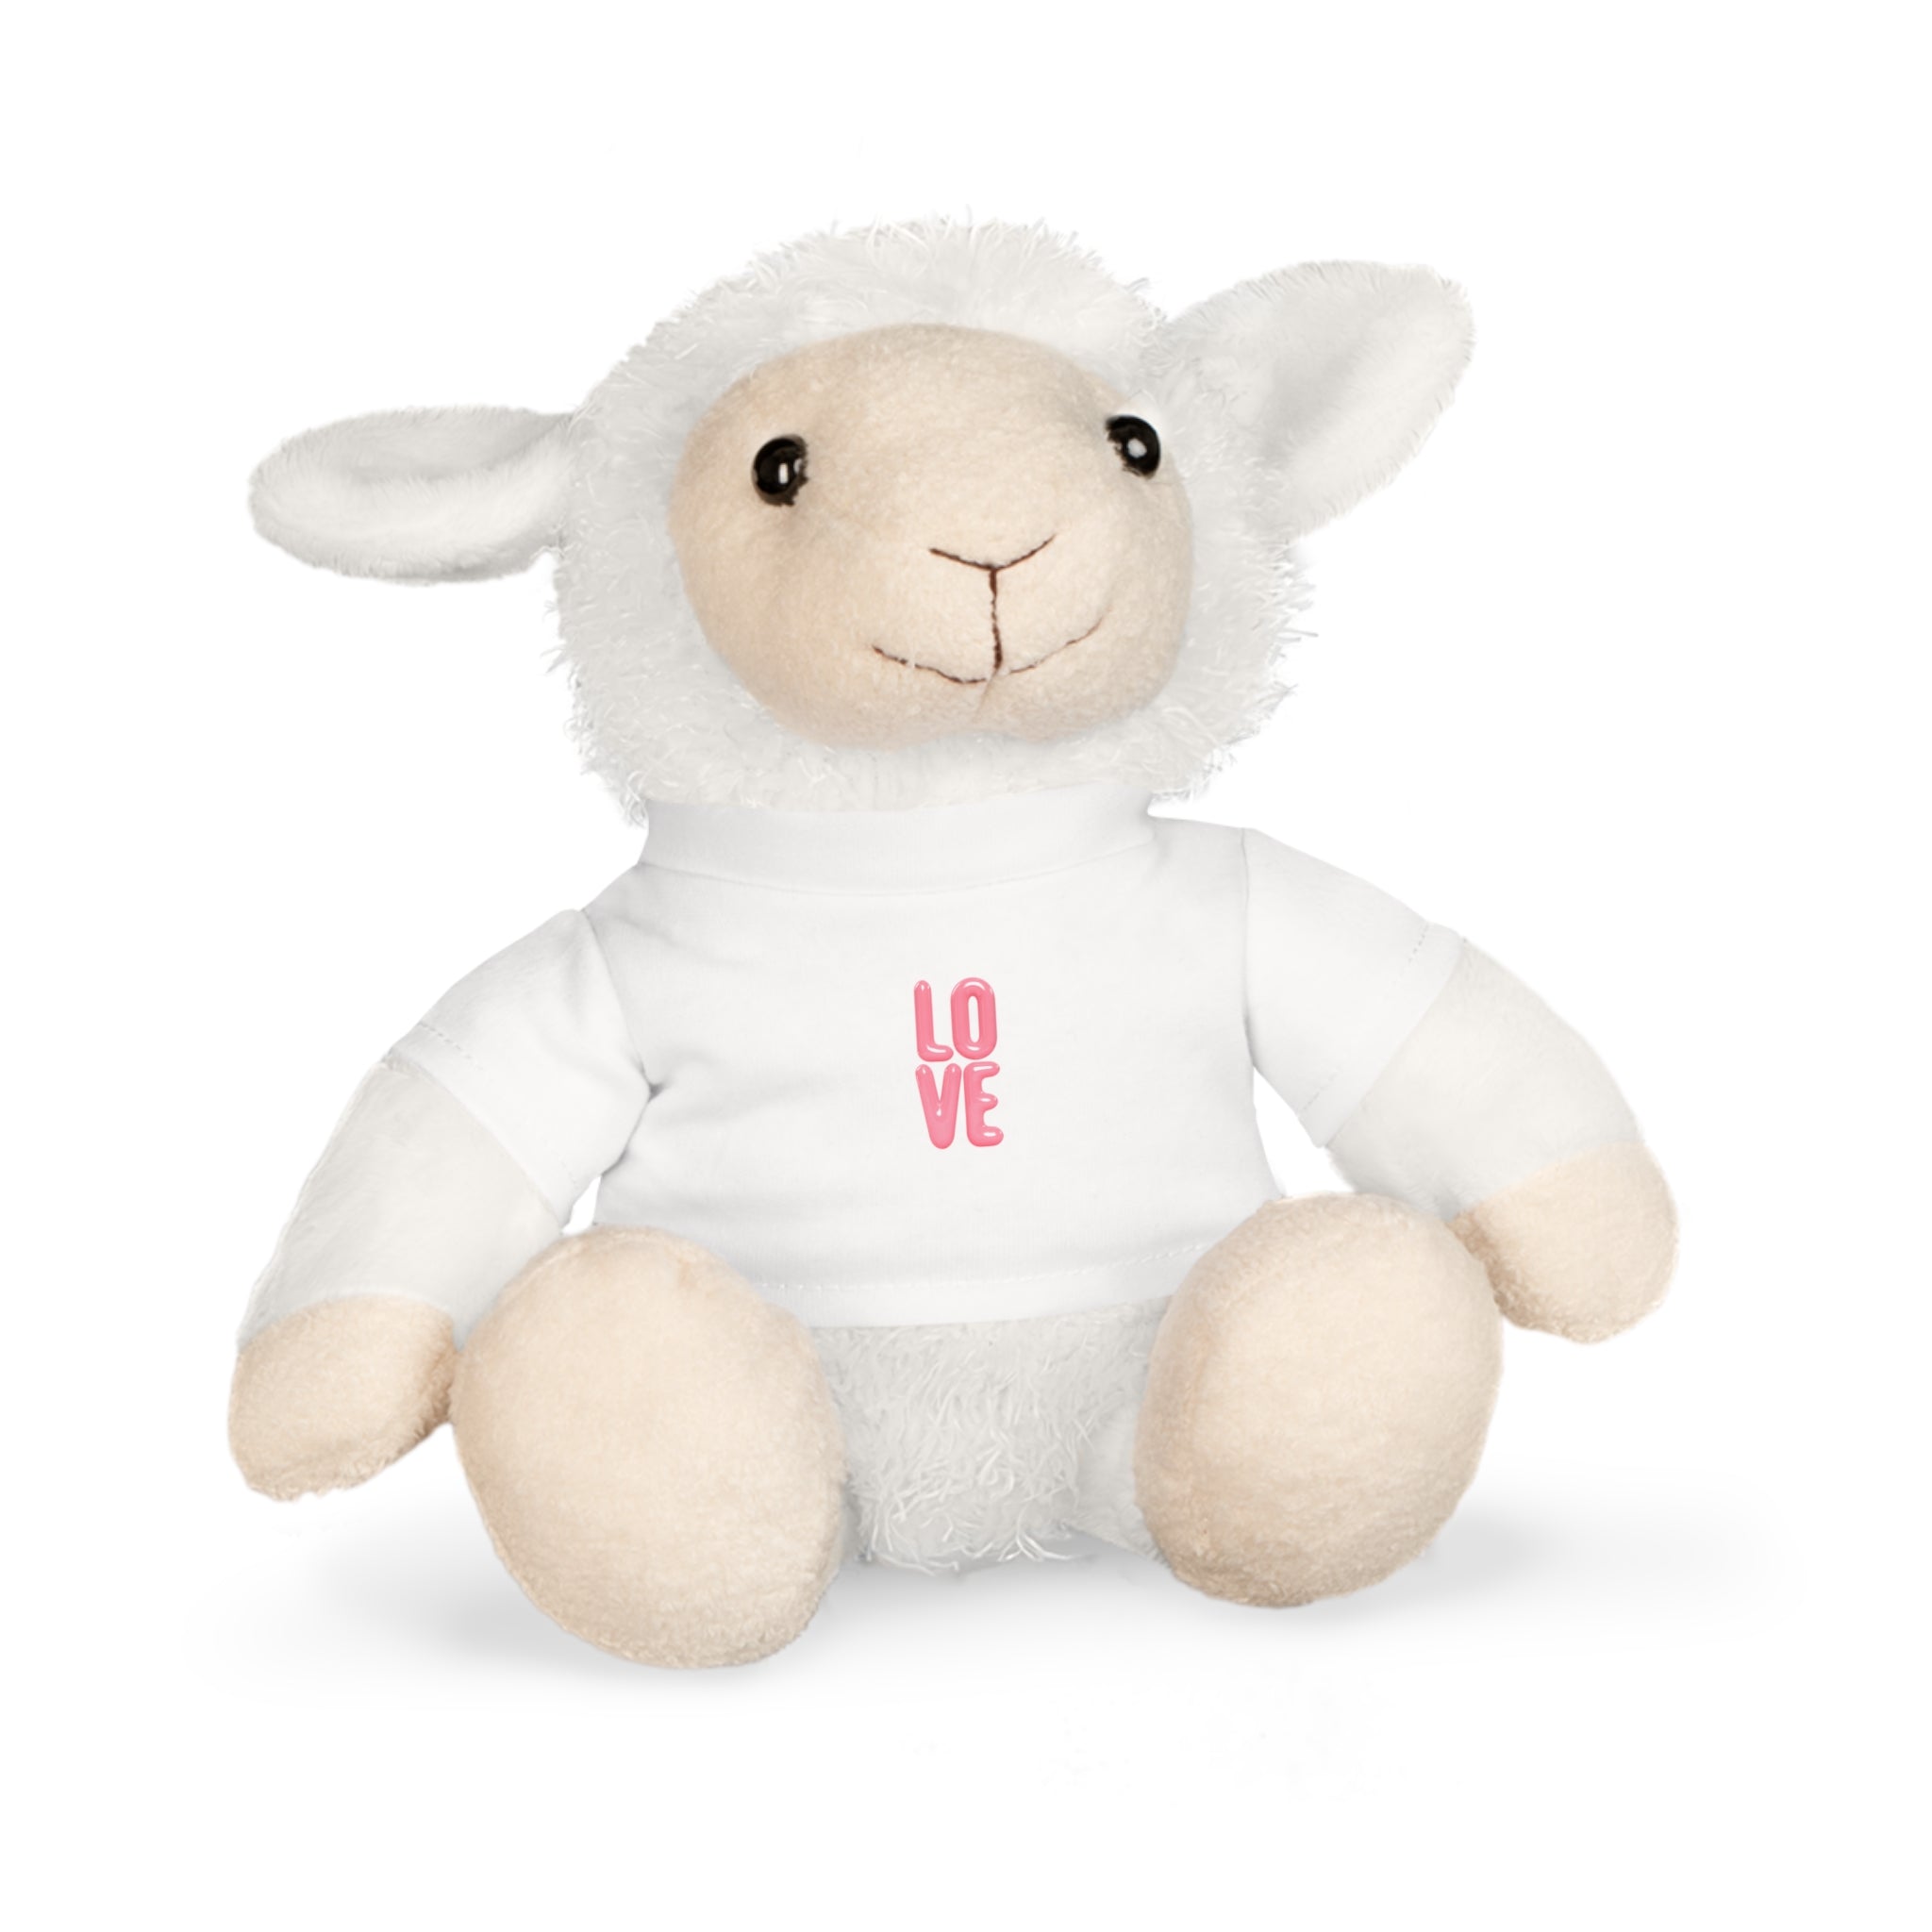 Love Plush Toy with T-Shirt